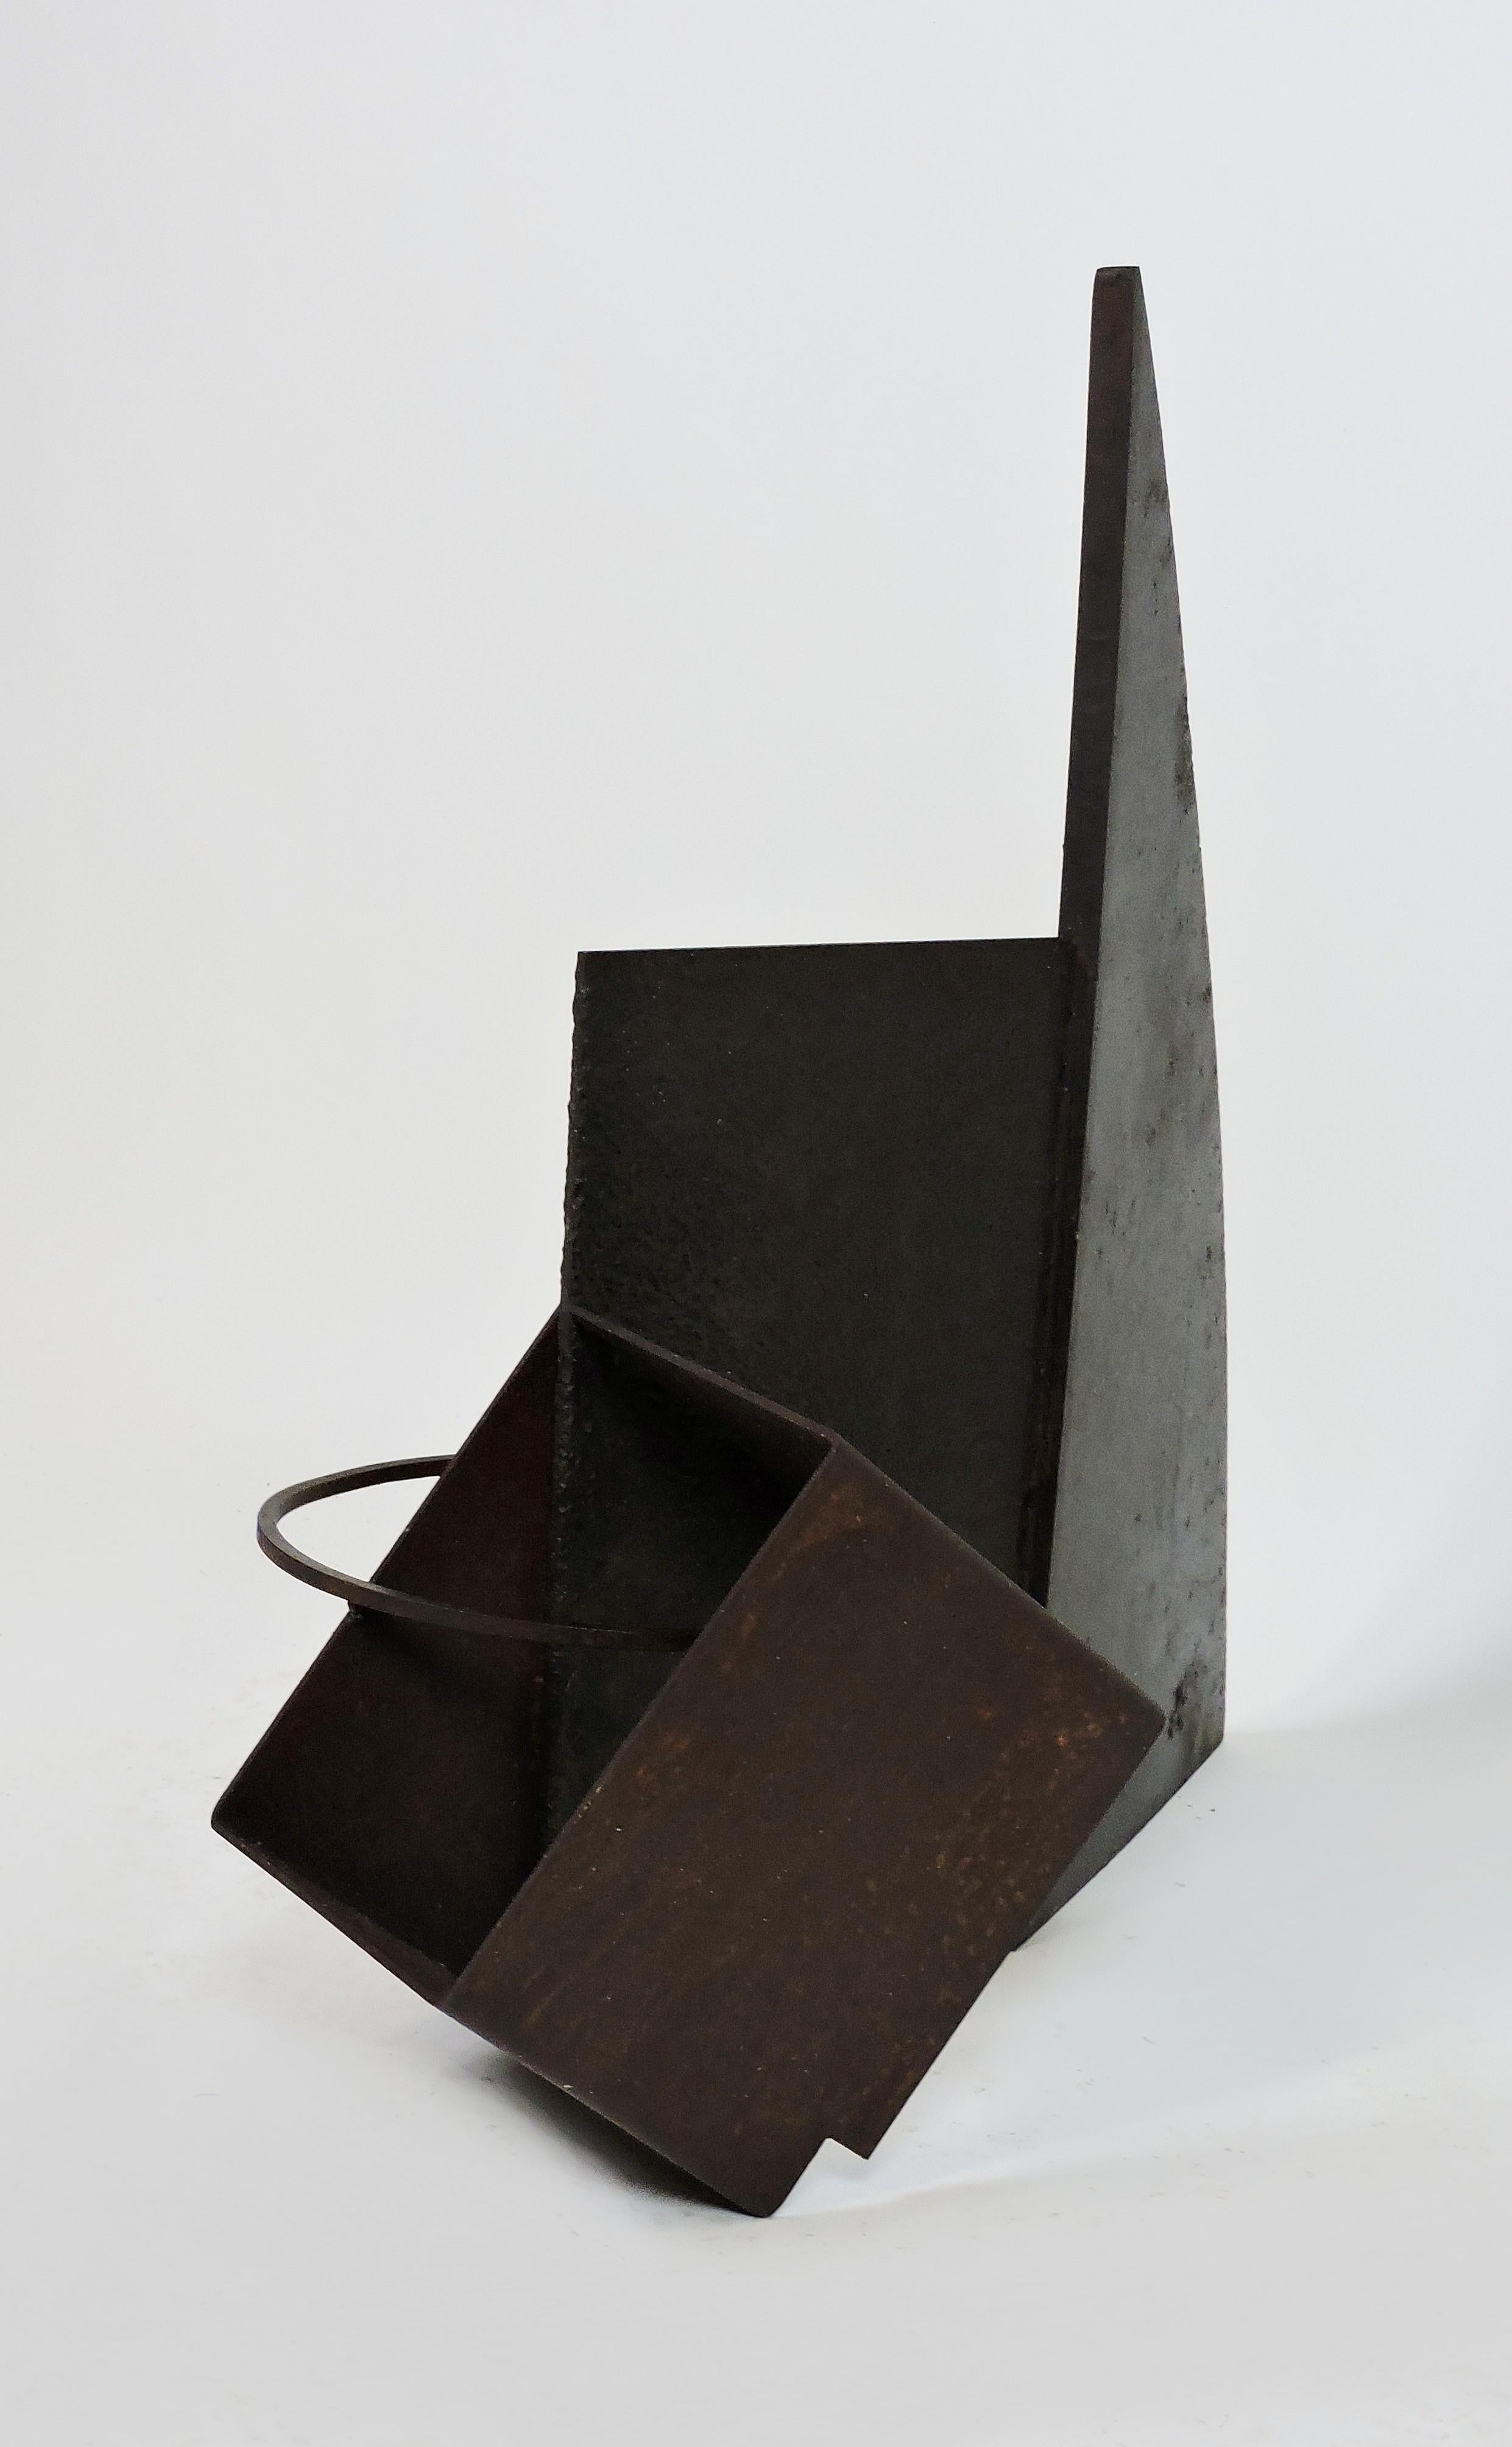 Minimalist style geometric welded steel sculpture by Philadelphia based artist David Tothero. This piece has a mixture of strong geometric shapes and is signed with welded artist signature DT in lower corner. It's 24 inches high and is suitable for